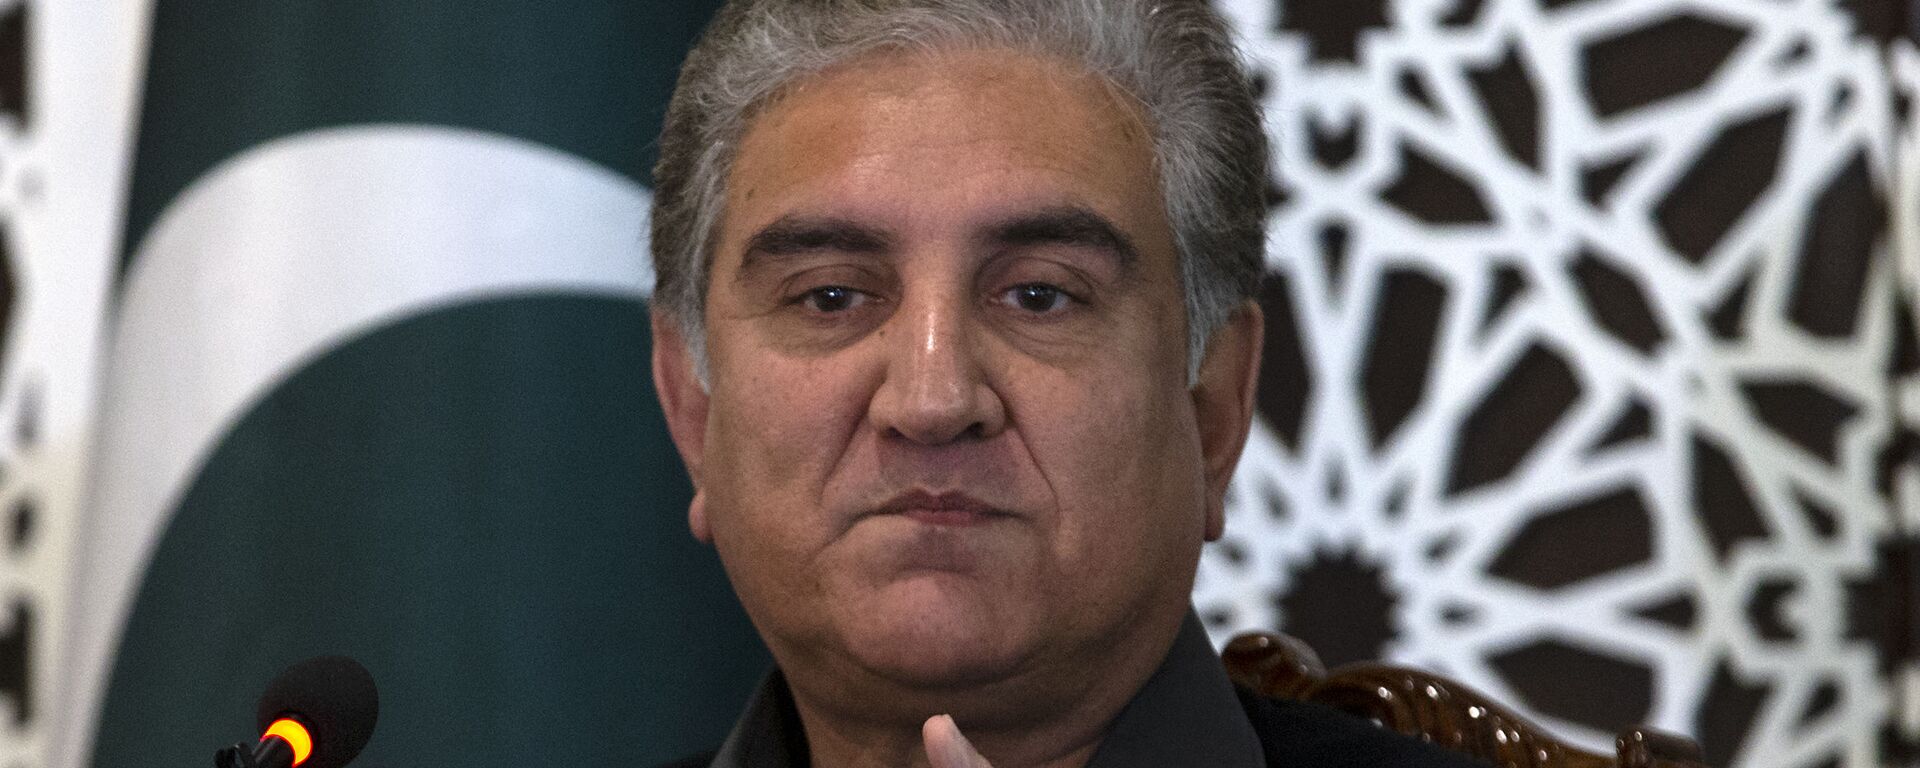 Pakistani Foreign Minister Shah Mahmood Qureshi speaks to reporters at the Foreign Ministry in Islamabad, Pakistan on Sunday, 1 March 2020. - Sputnik International, 1920, 23.08.2021